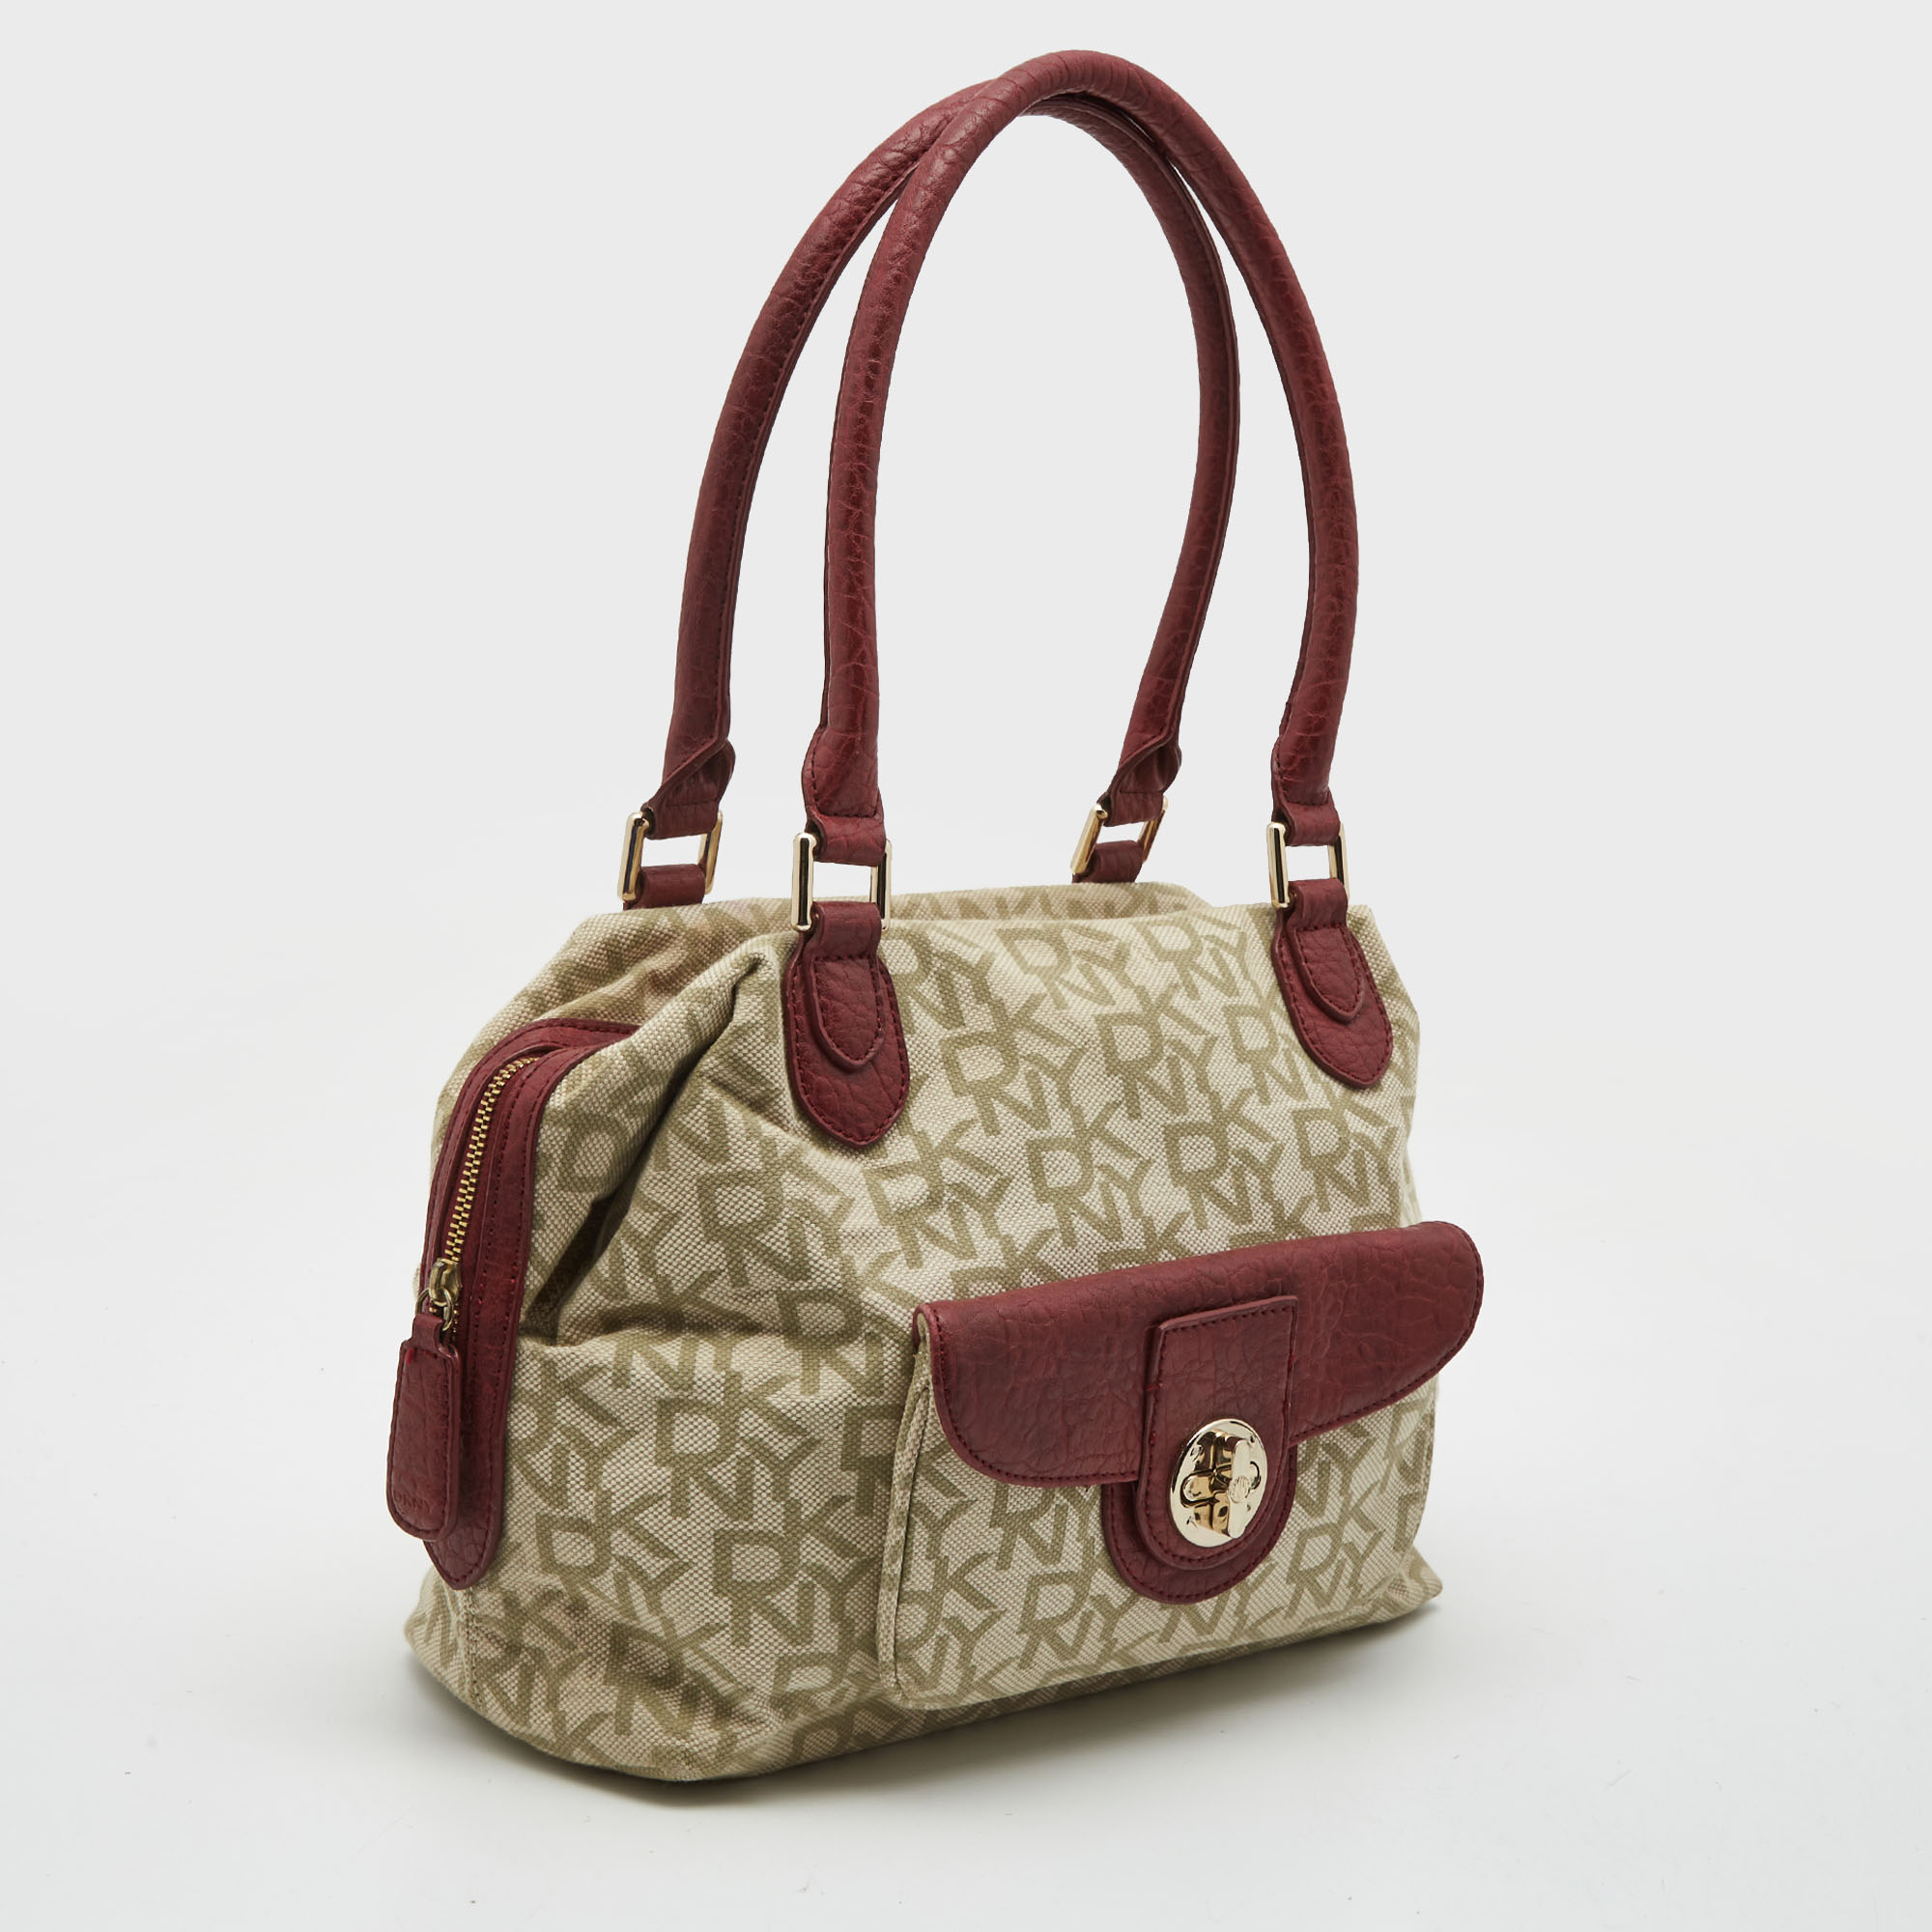 DKNY Red/Beige Monogram Canvas And Leather Turnlock Pocket Satchel